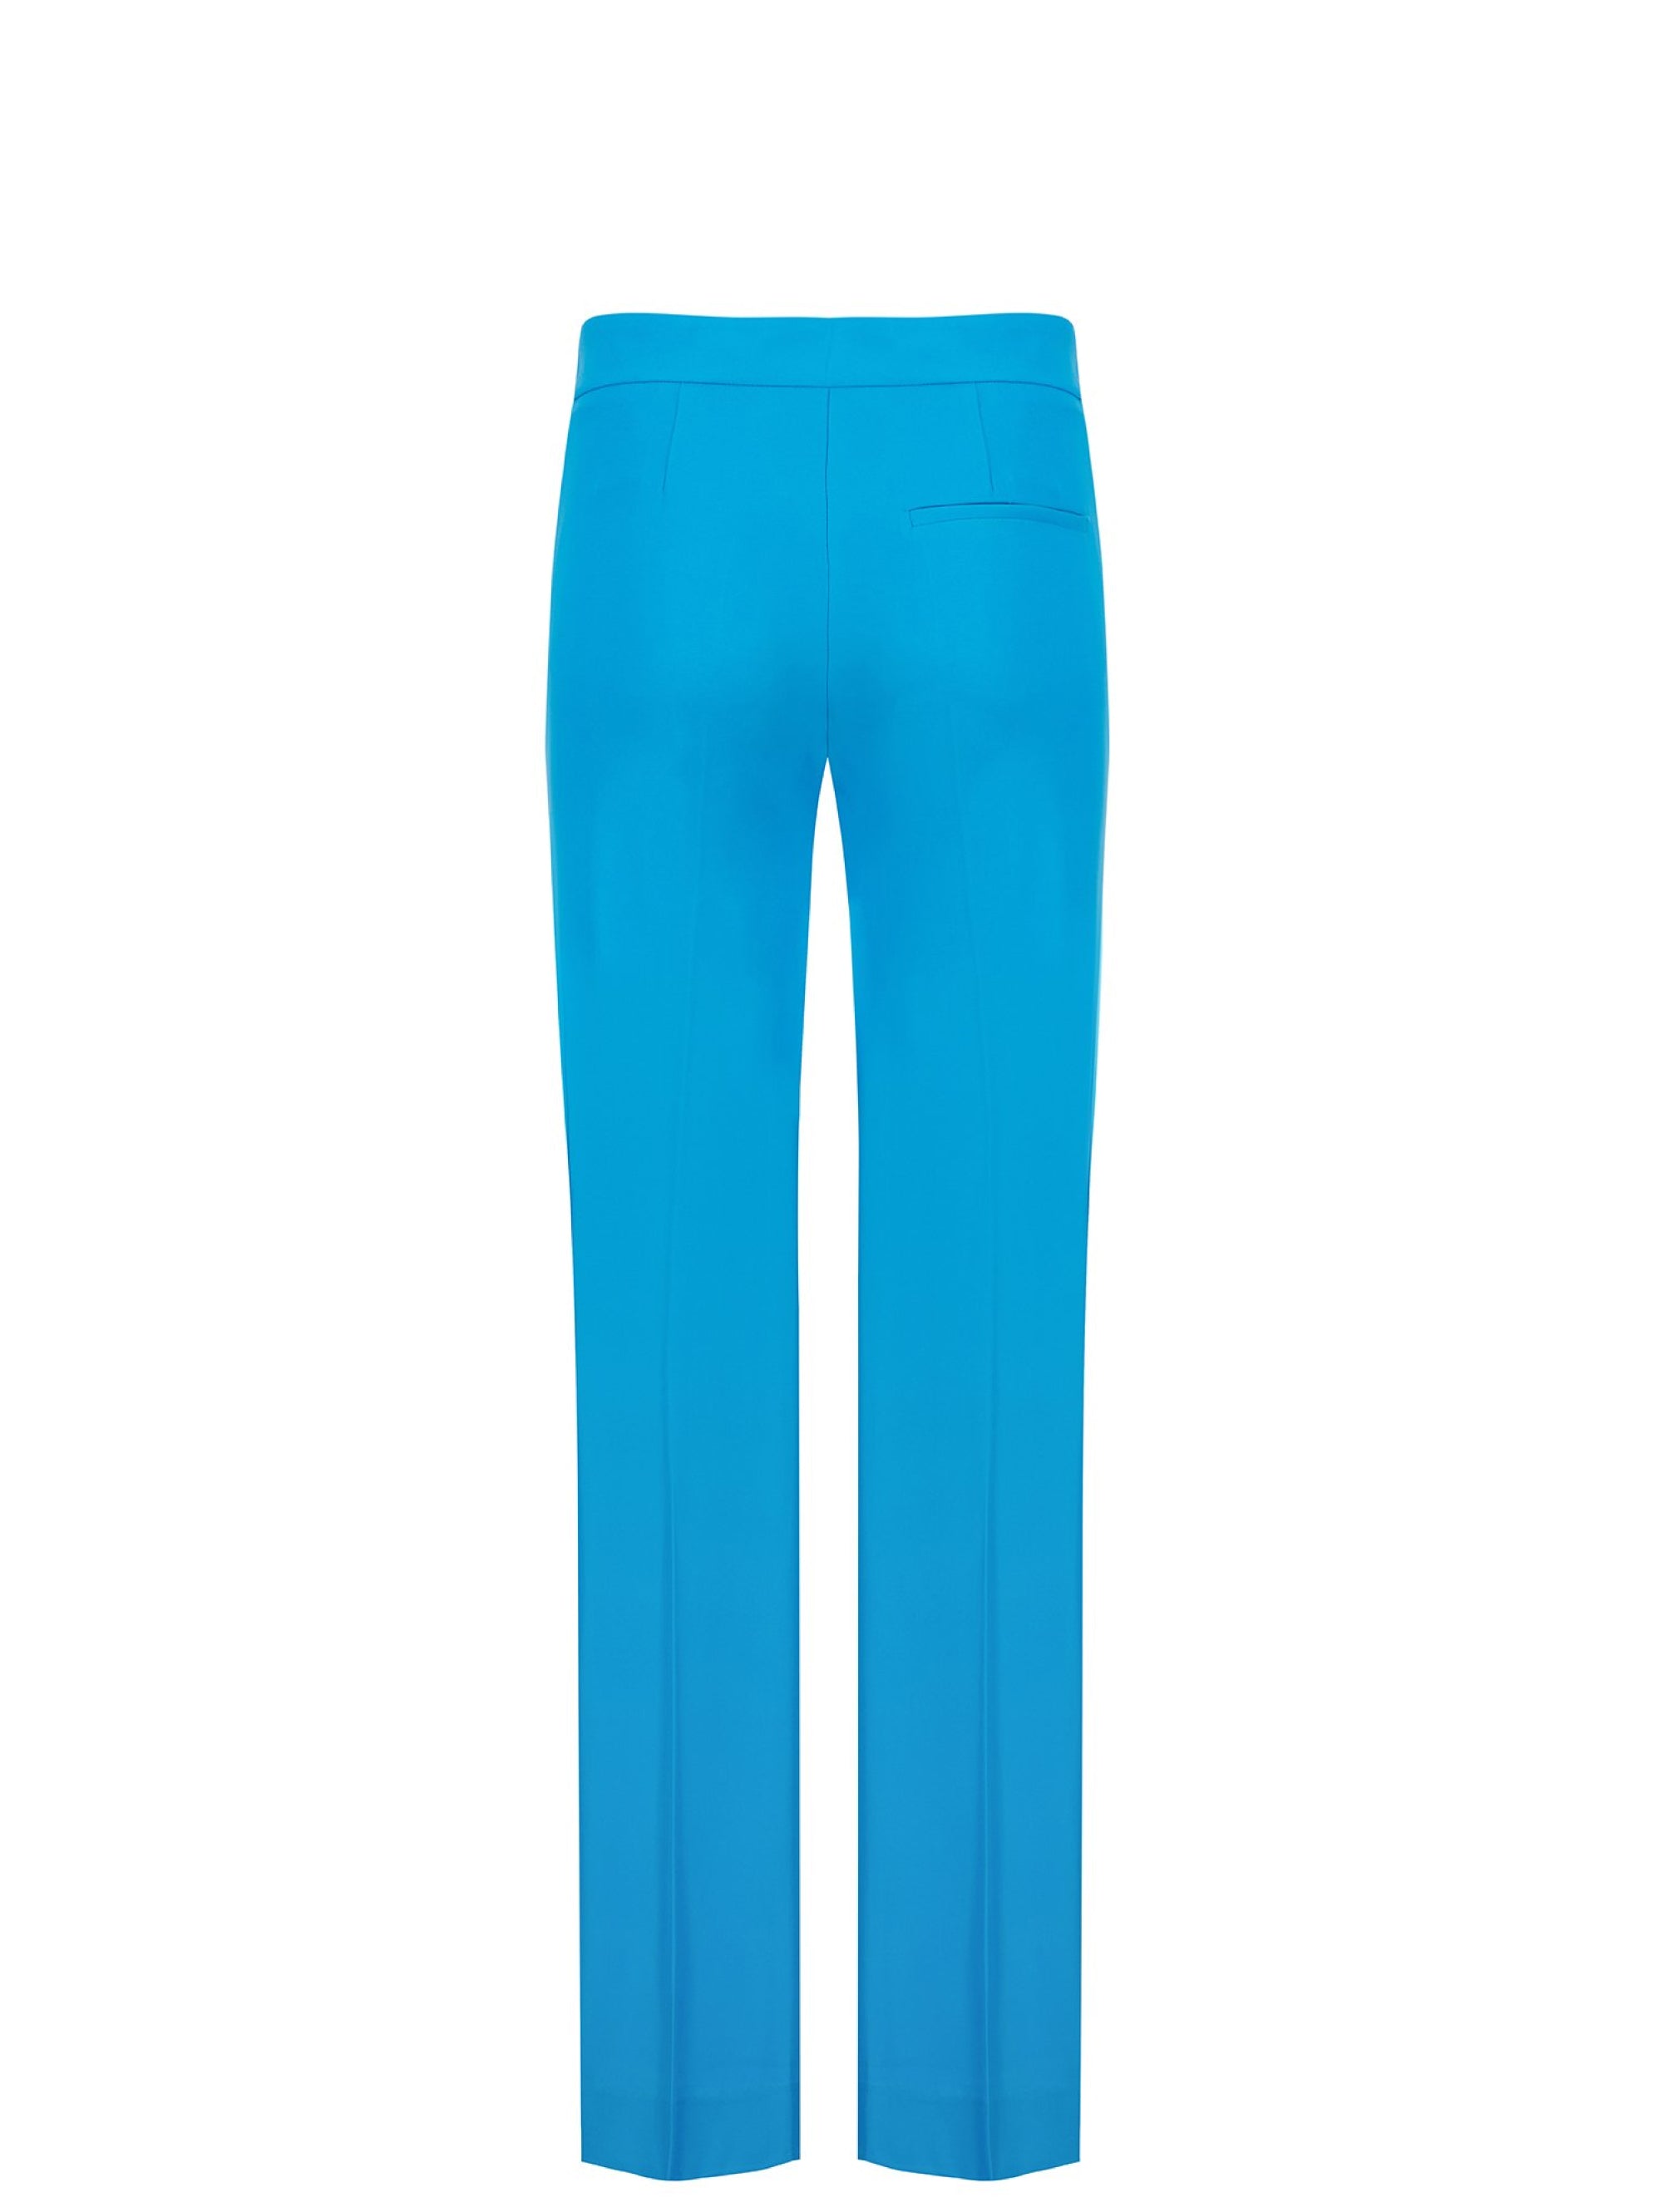 Palazzo Pants in Blue Fluid Fabric